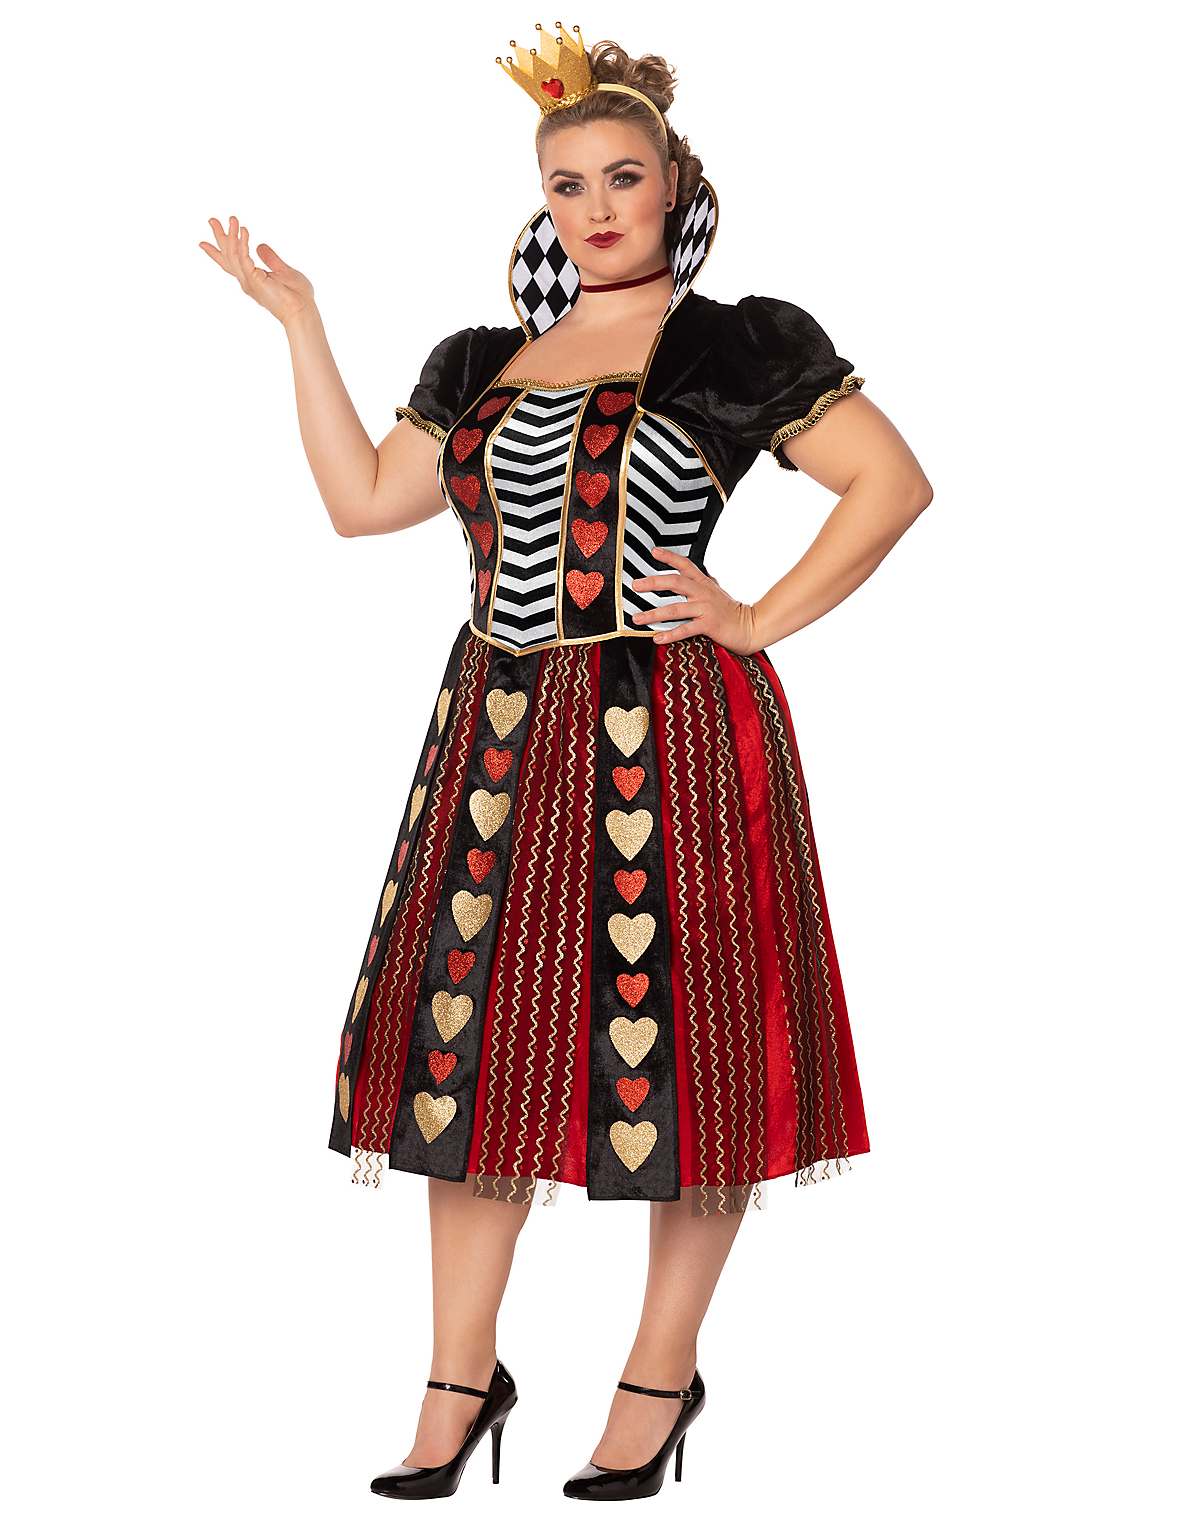 Queen of Hearts plus size costume